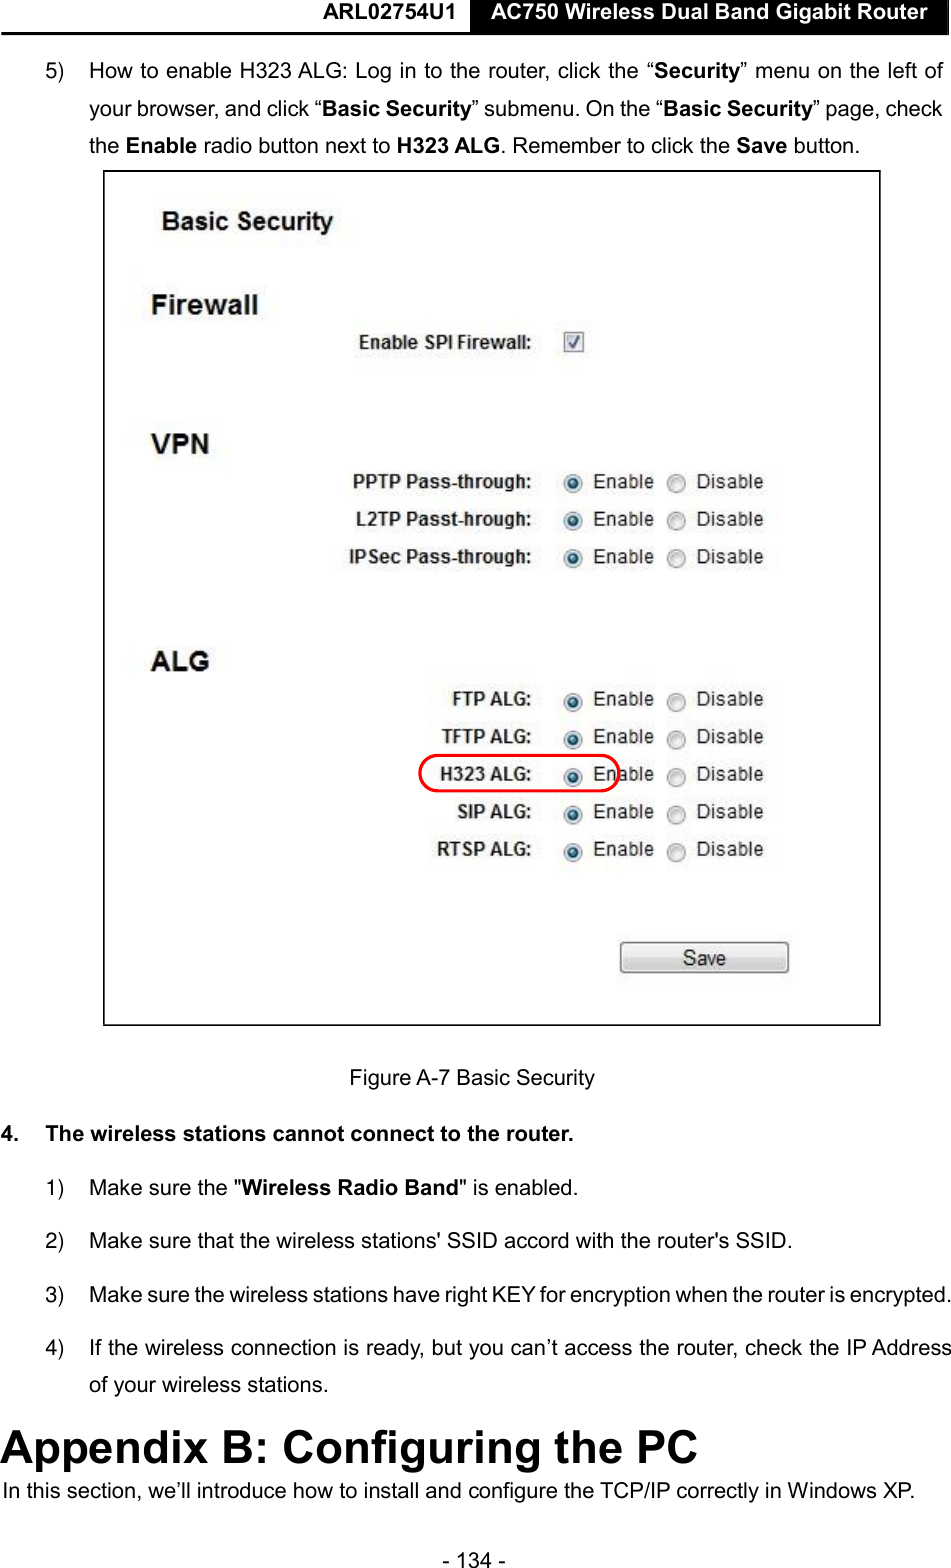  ARL02754U1  AC750 Wireless Dual Band Gigabit Router    - 134 -  5) How to enable H323 ALG: Log in to the router, click the “Security” menu on the left of your browser, and click “Basic Security” submenu. On the “Basic Security” page, check the Enable radio button next to H323 ALG. Remember to click the Save button.   Figure A-7 Basic Security  4.  The wireless stations cannot connect to the router.  1) Make sure the &quot;Wireless Radio Band&quot; is enabled.  2) Make sure that the wireless stations&apos; SSID accord with the router&apos;s SSID.  3) Make sure the wireless stations have right KEY for encryption when the router is encrypted.  4) If the wireless connection is ready, but you can’t access the router, check the IP Address of your wireless stations.  Appendix B: Configuring the PC  In this section, we’ll introduce how to install and configure the TCP/IP correctly in Windows XP.        